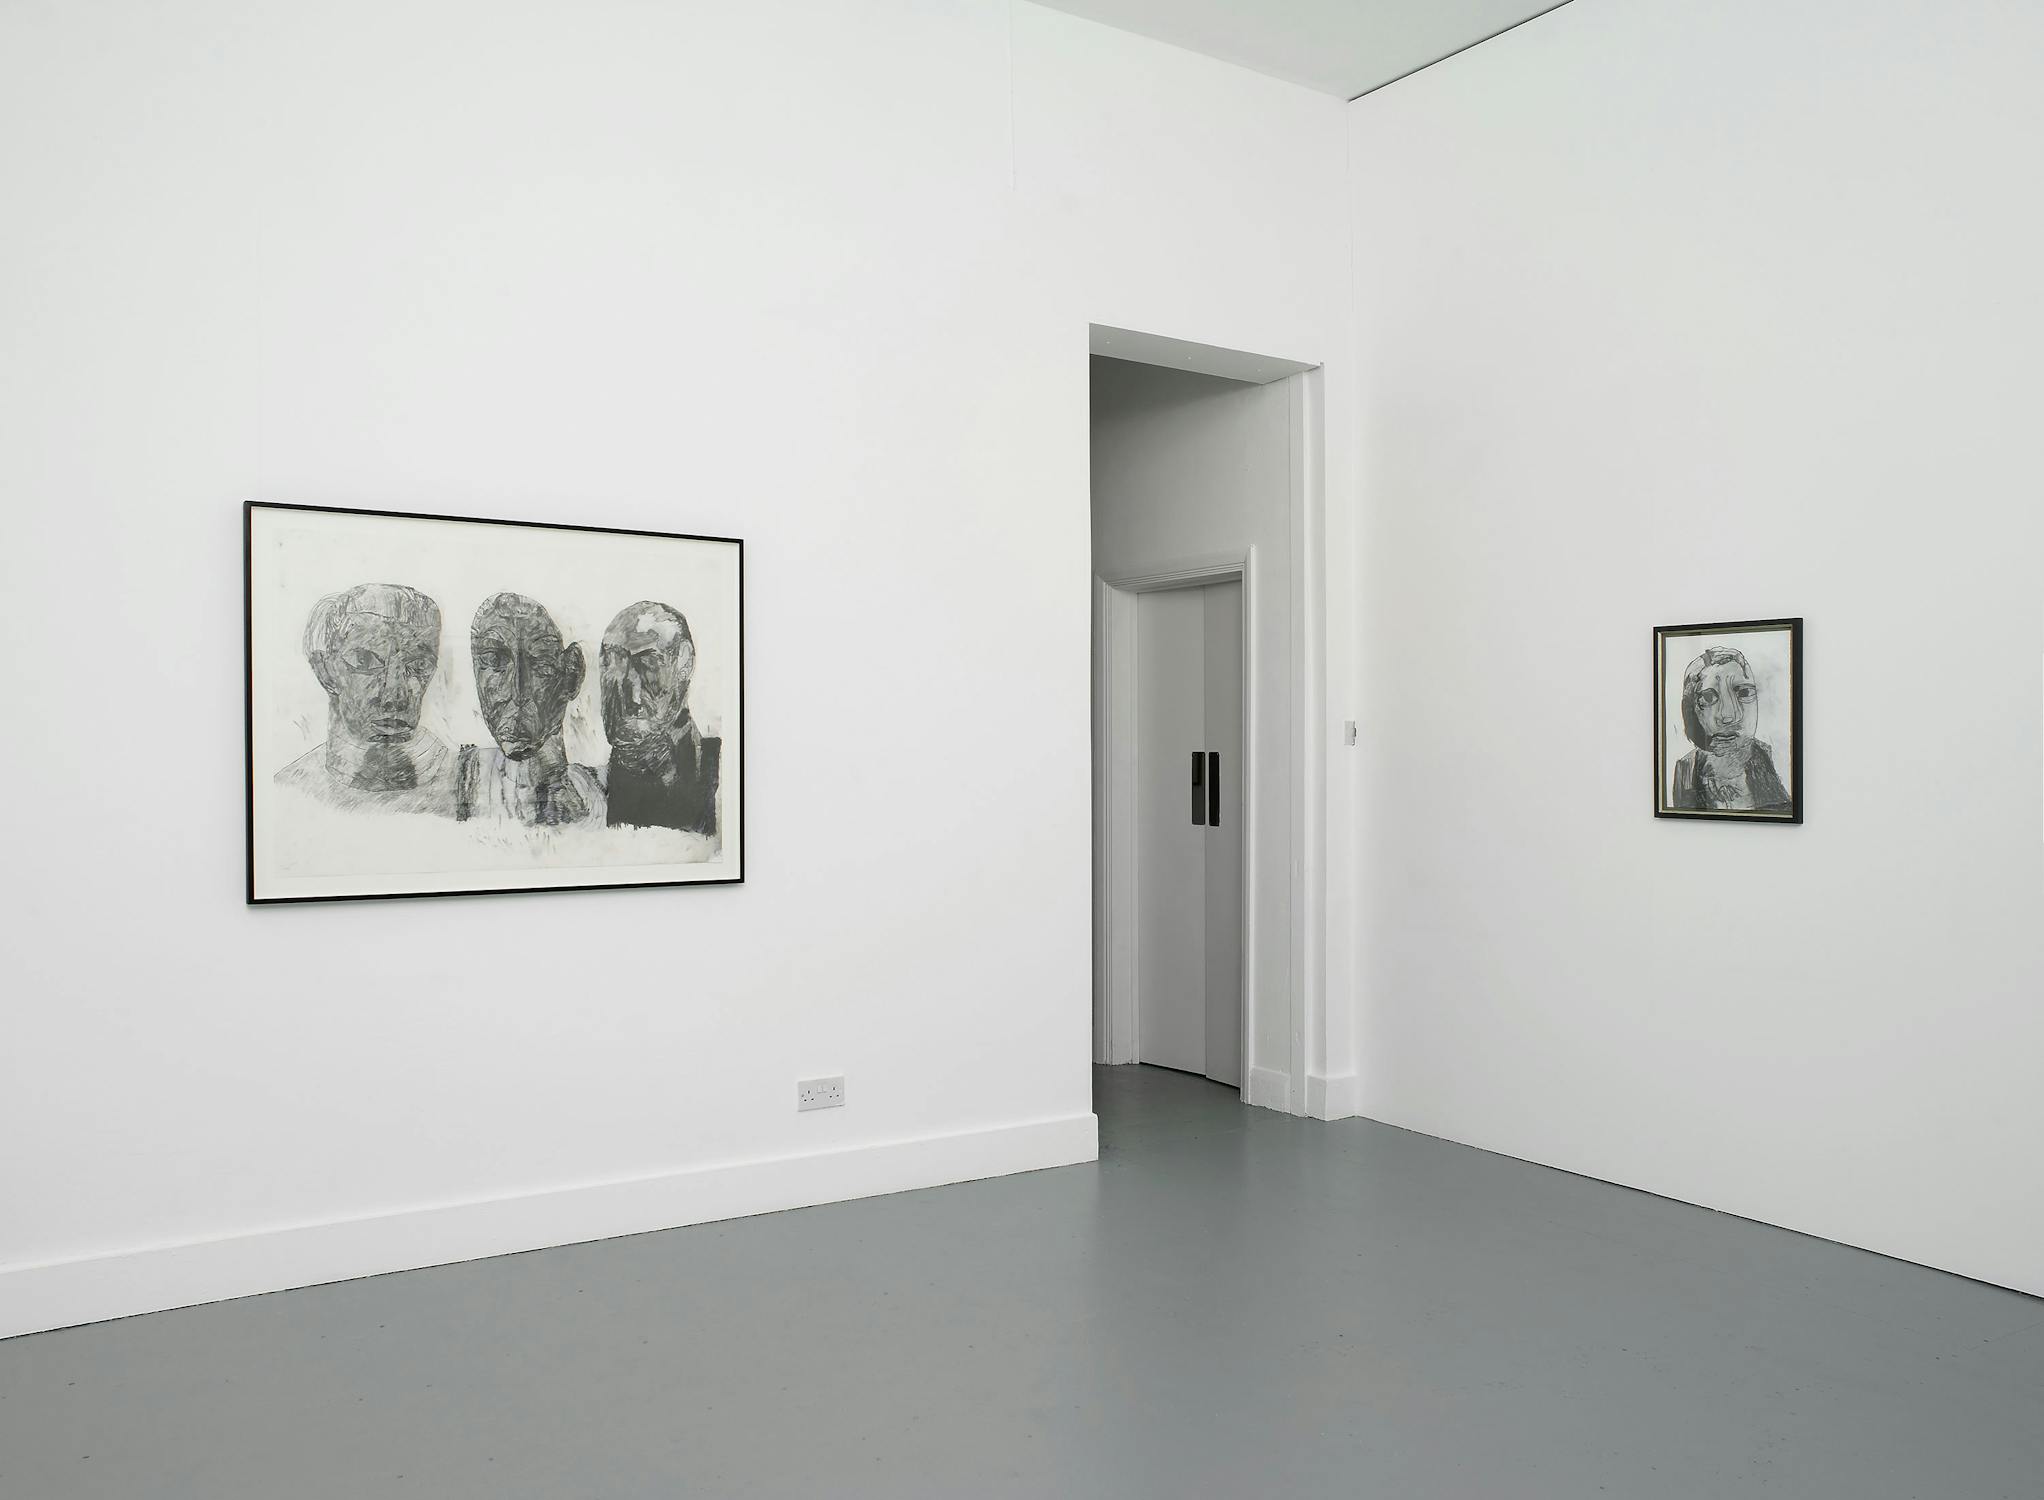 A pencil drawing of three figures with exaggerated features is hung beside a smaller similar portrait in the corner of a white-walled gallery